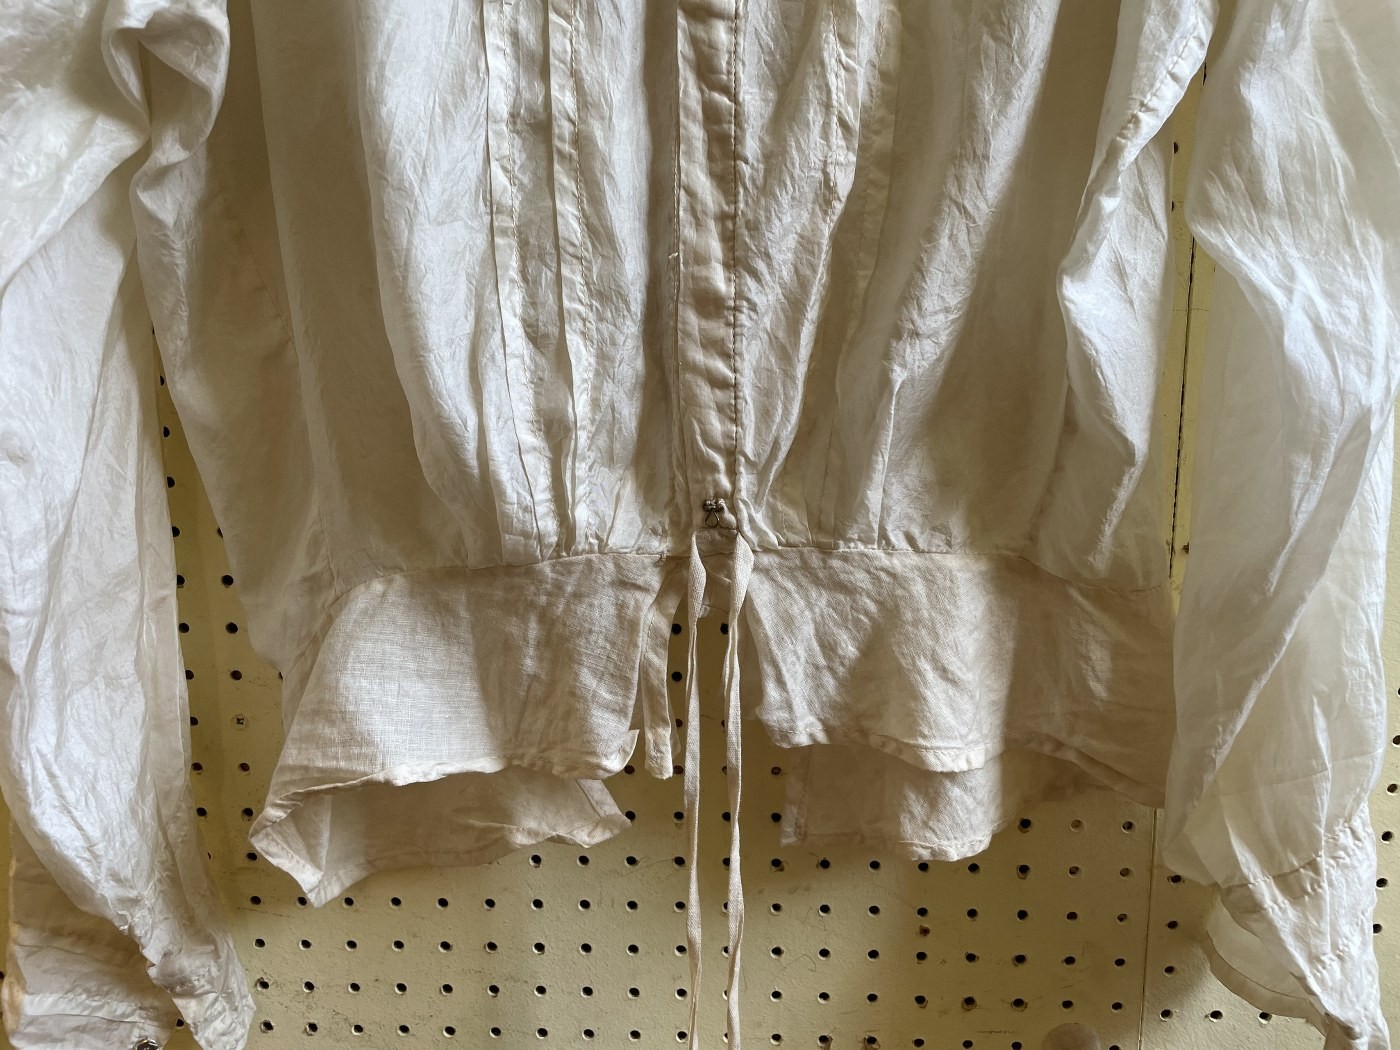 A late 19th century/early 20th century blouse, with a lace collar and trim - Image 5 of 7